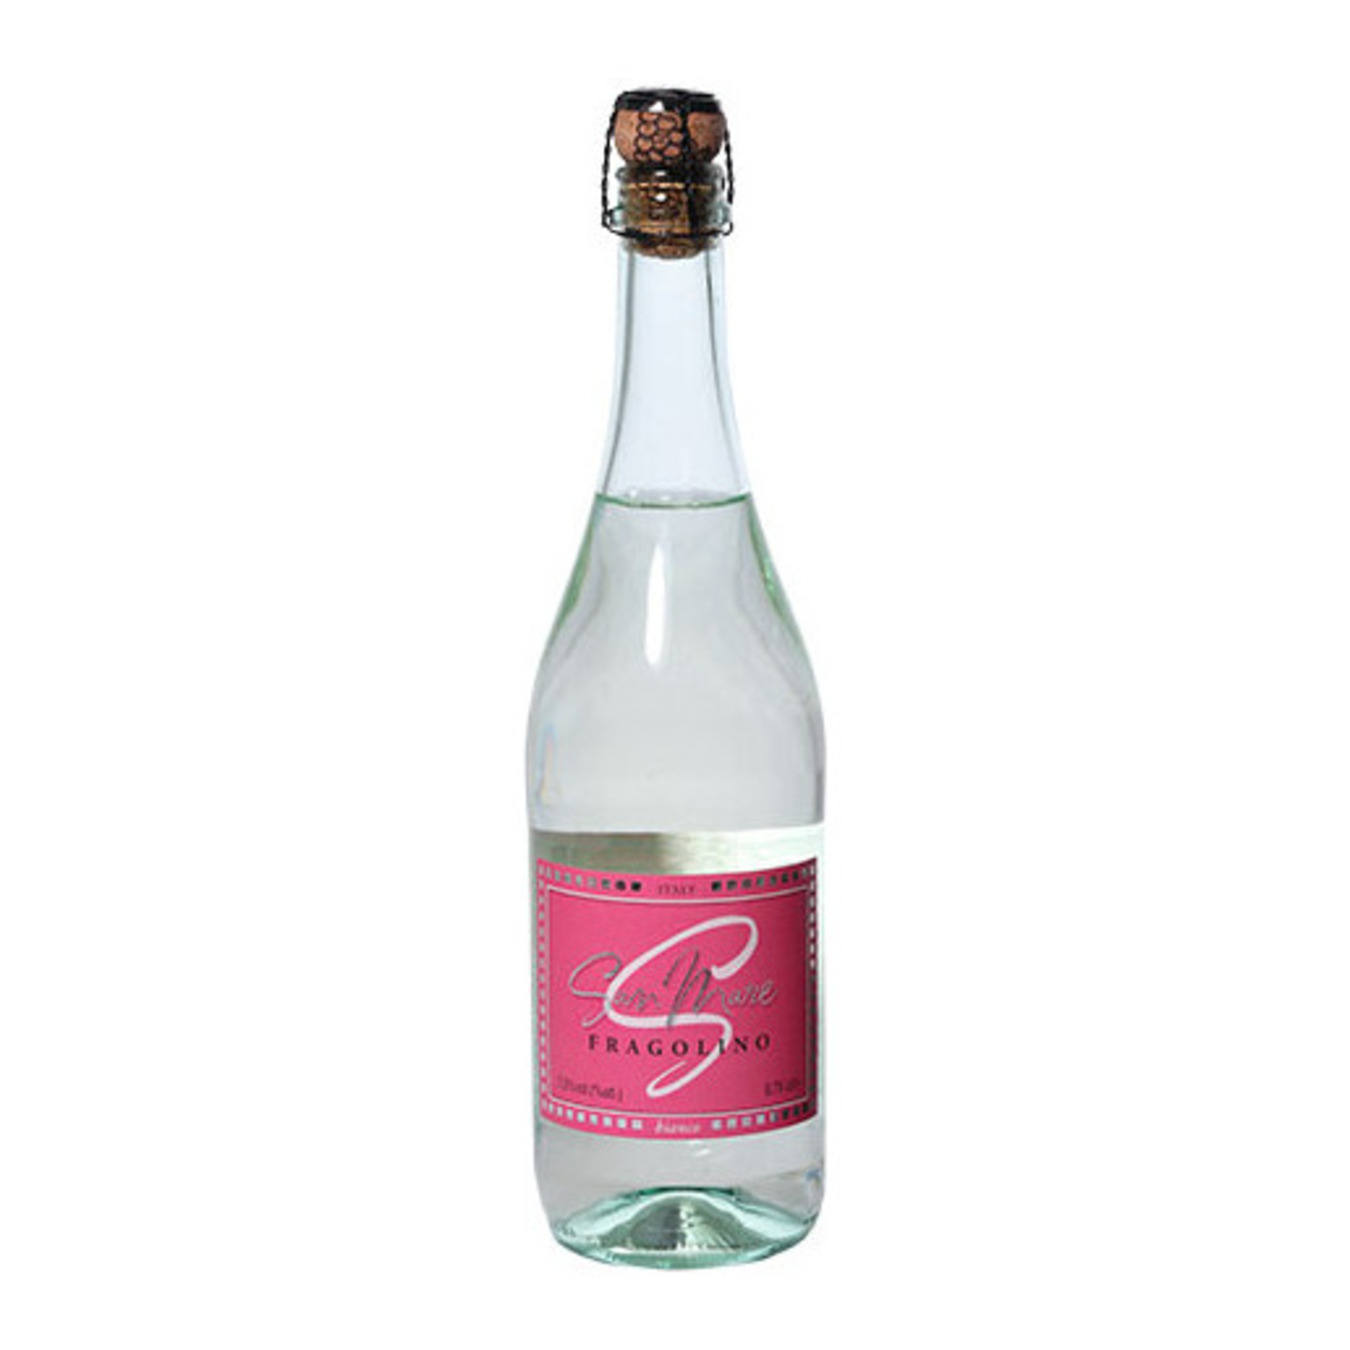 San Mare Fragolino White Sweet Sparkling Wine with Strawberry Flavor 7,5% 0,75l